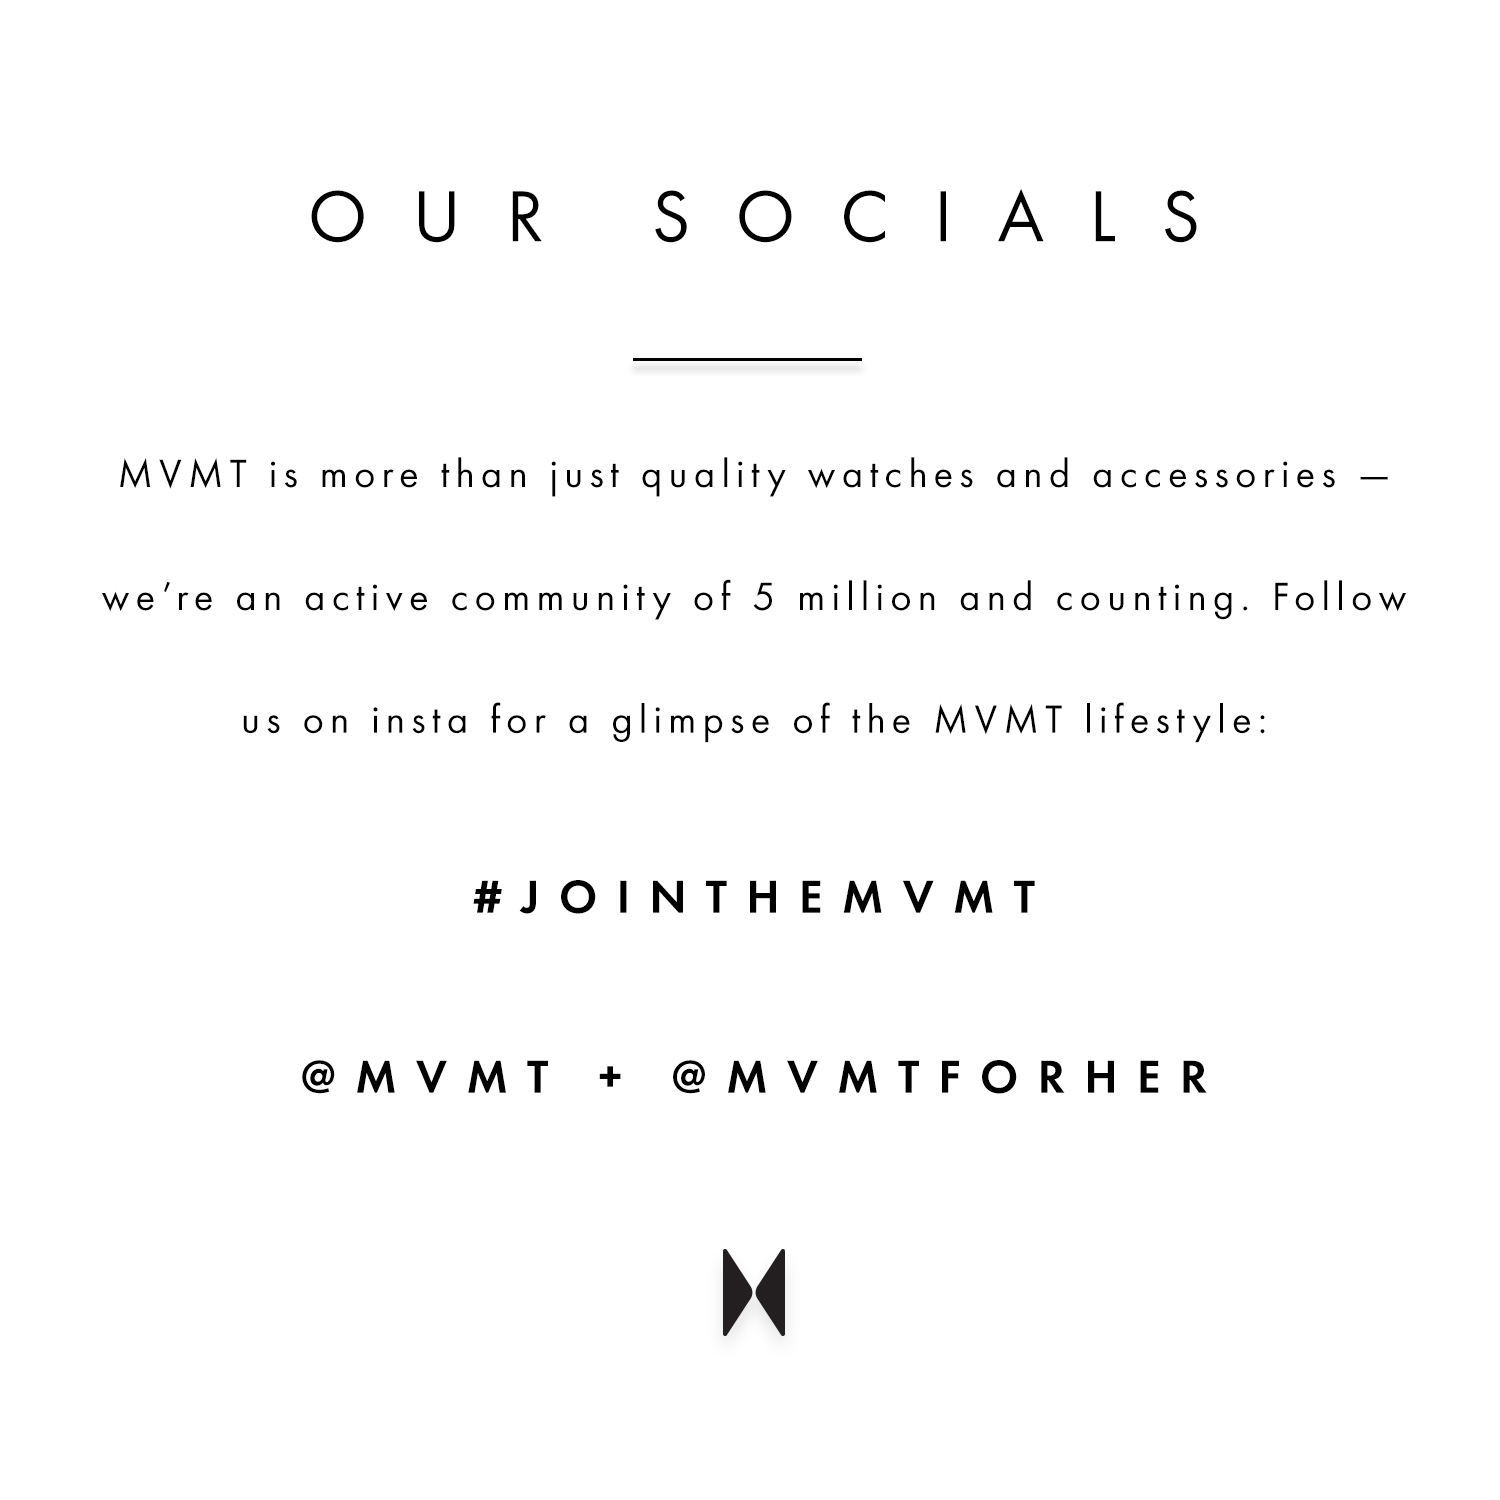 Our socials. MVMT is more than just quality watches and accessories - we're an active community of 5 million and counting. Follow us on insta for a glimpse of the MVMT lifestyle: #jointhemvmt @mvmt + @mvmtforher